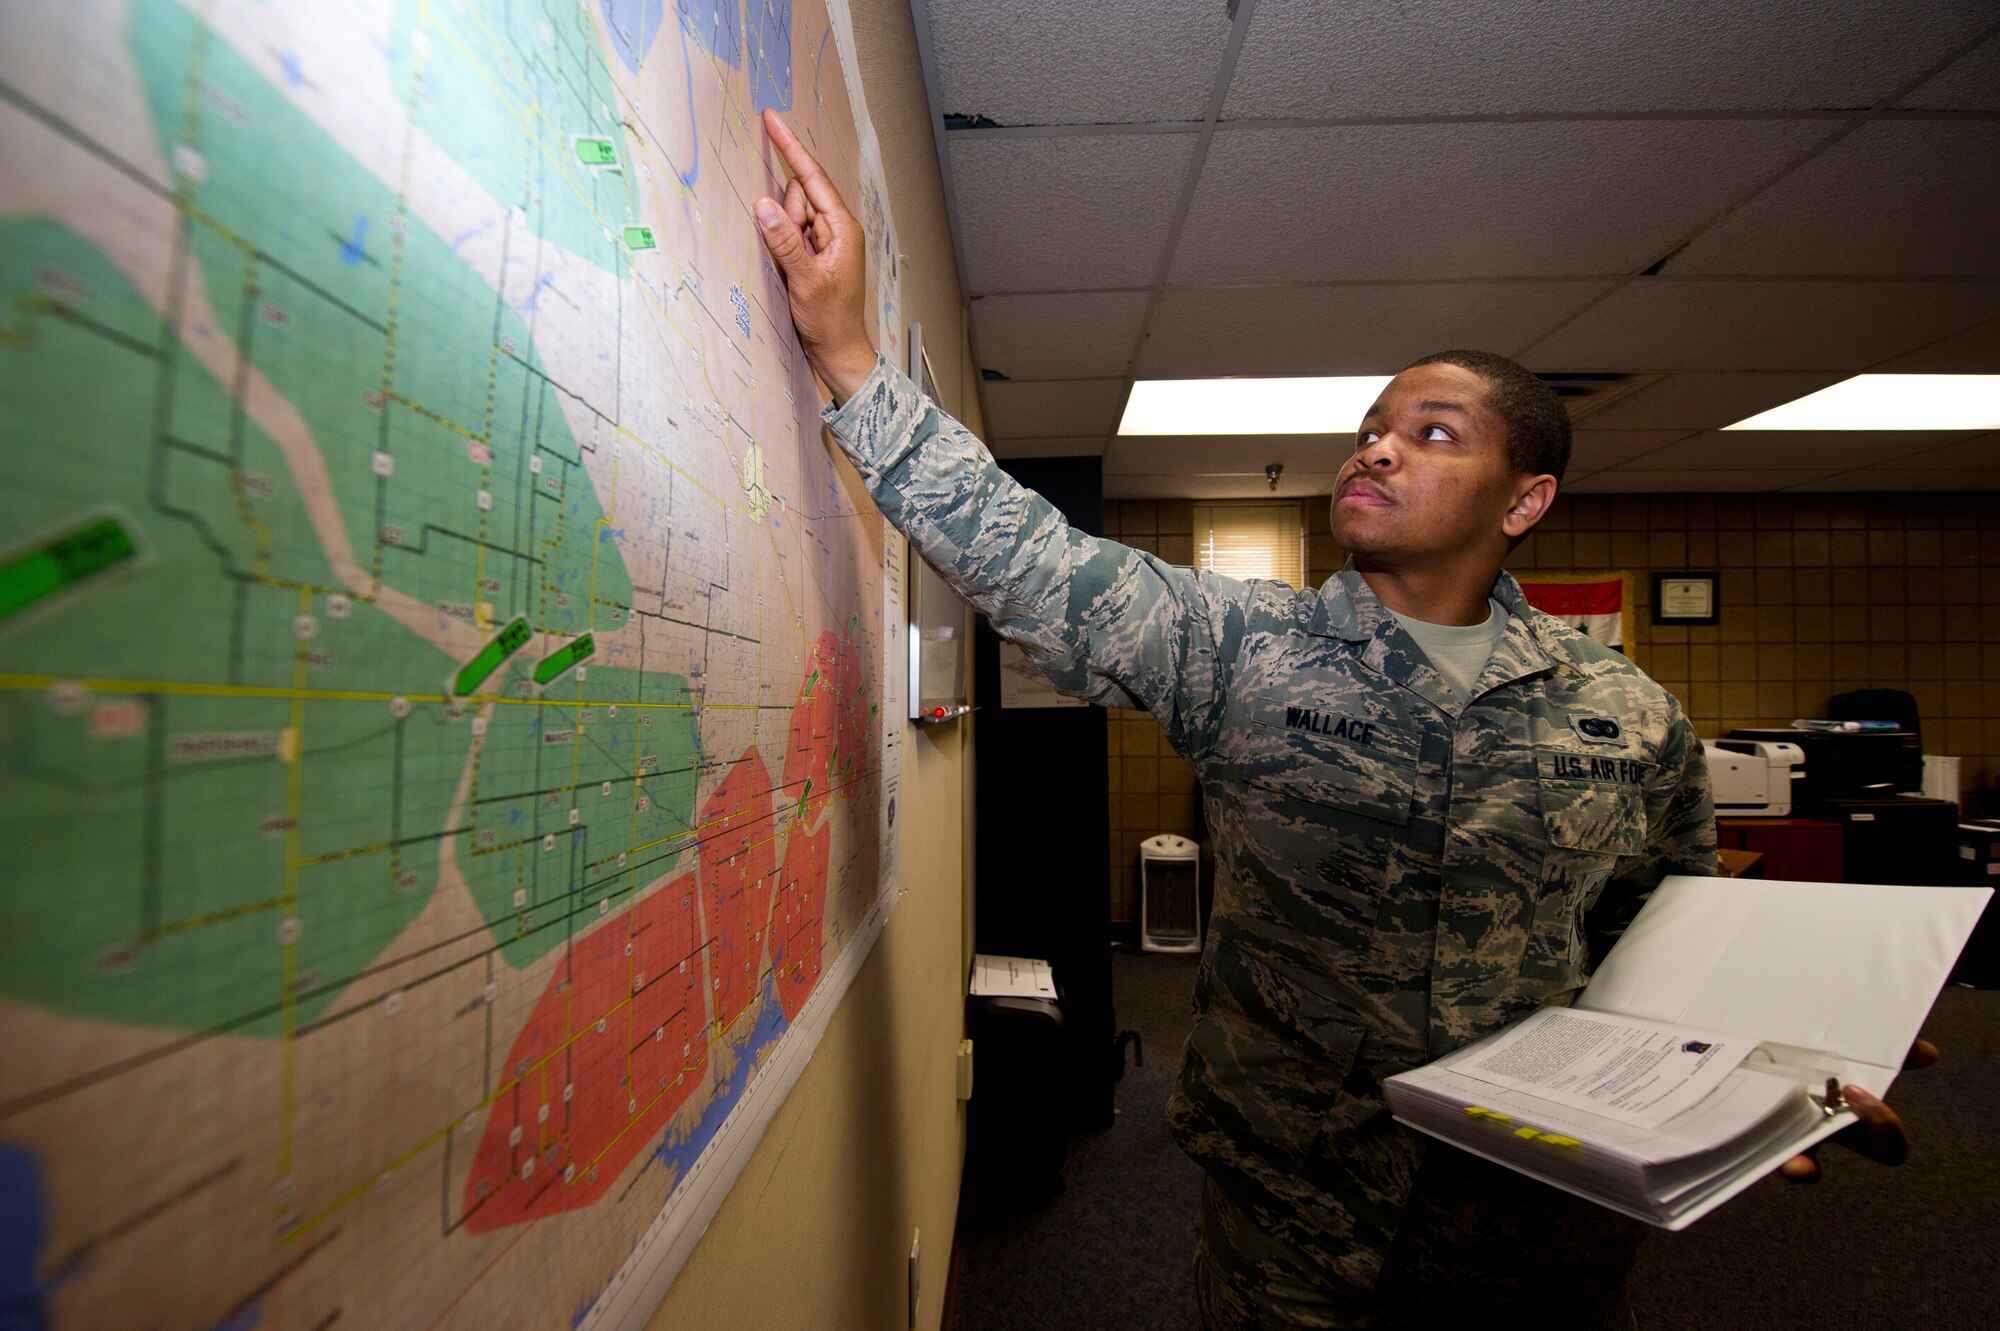 Staff Sgt. David Wallace III, 91st Security Forces Group plans and programs section, identifies possible threats and hazards to security force teams within the missile complex along, with crafting tactical defense plans for launch facilities and missile alert facilities at Minot Air Force Base, N.D., May 12, 2014. Wallace was named one of the 12 Outstanding Airmen of the Year. (U.S. Air Force photo/Senior Airman Brittany Y. Auld)
